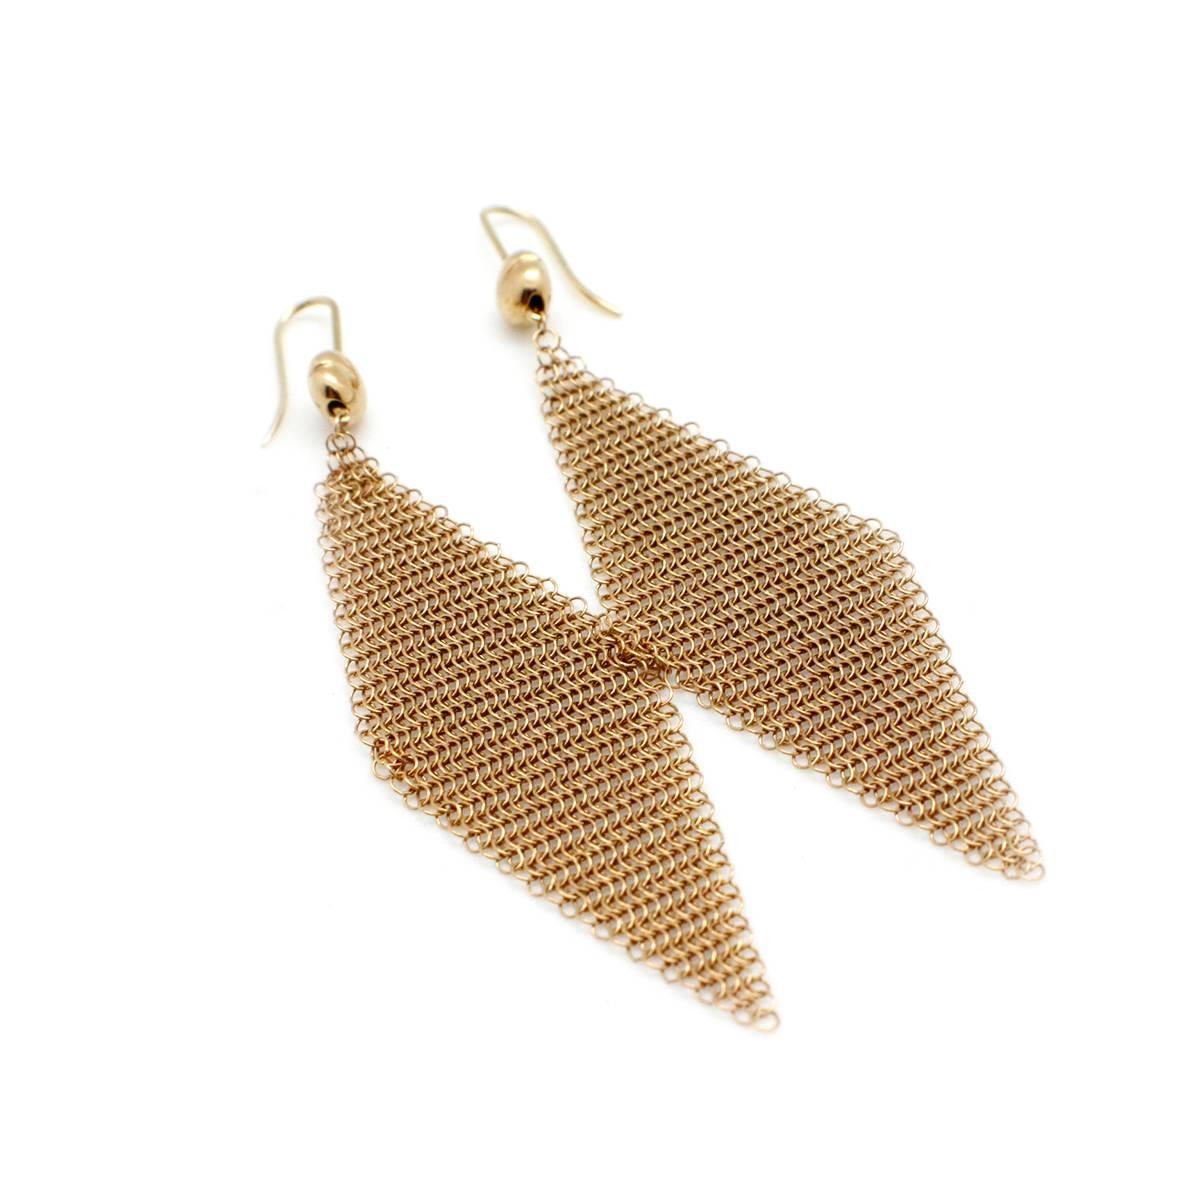 Elsa Peretti Gold Mesh Earrings In Excellent Condition For Sale In Scottsdale, AZ